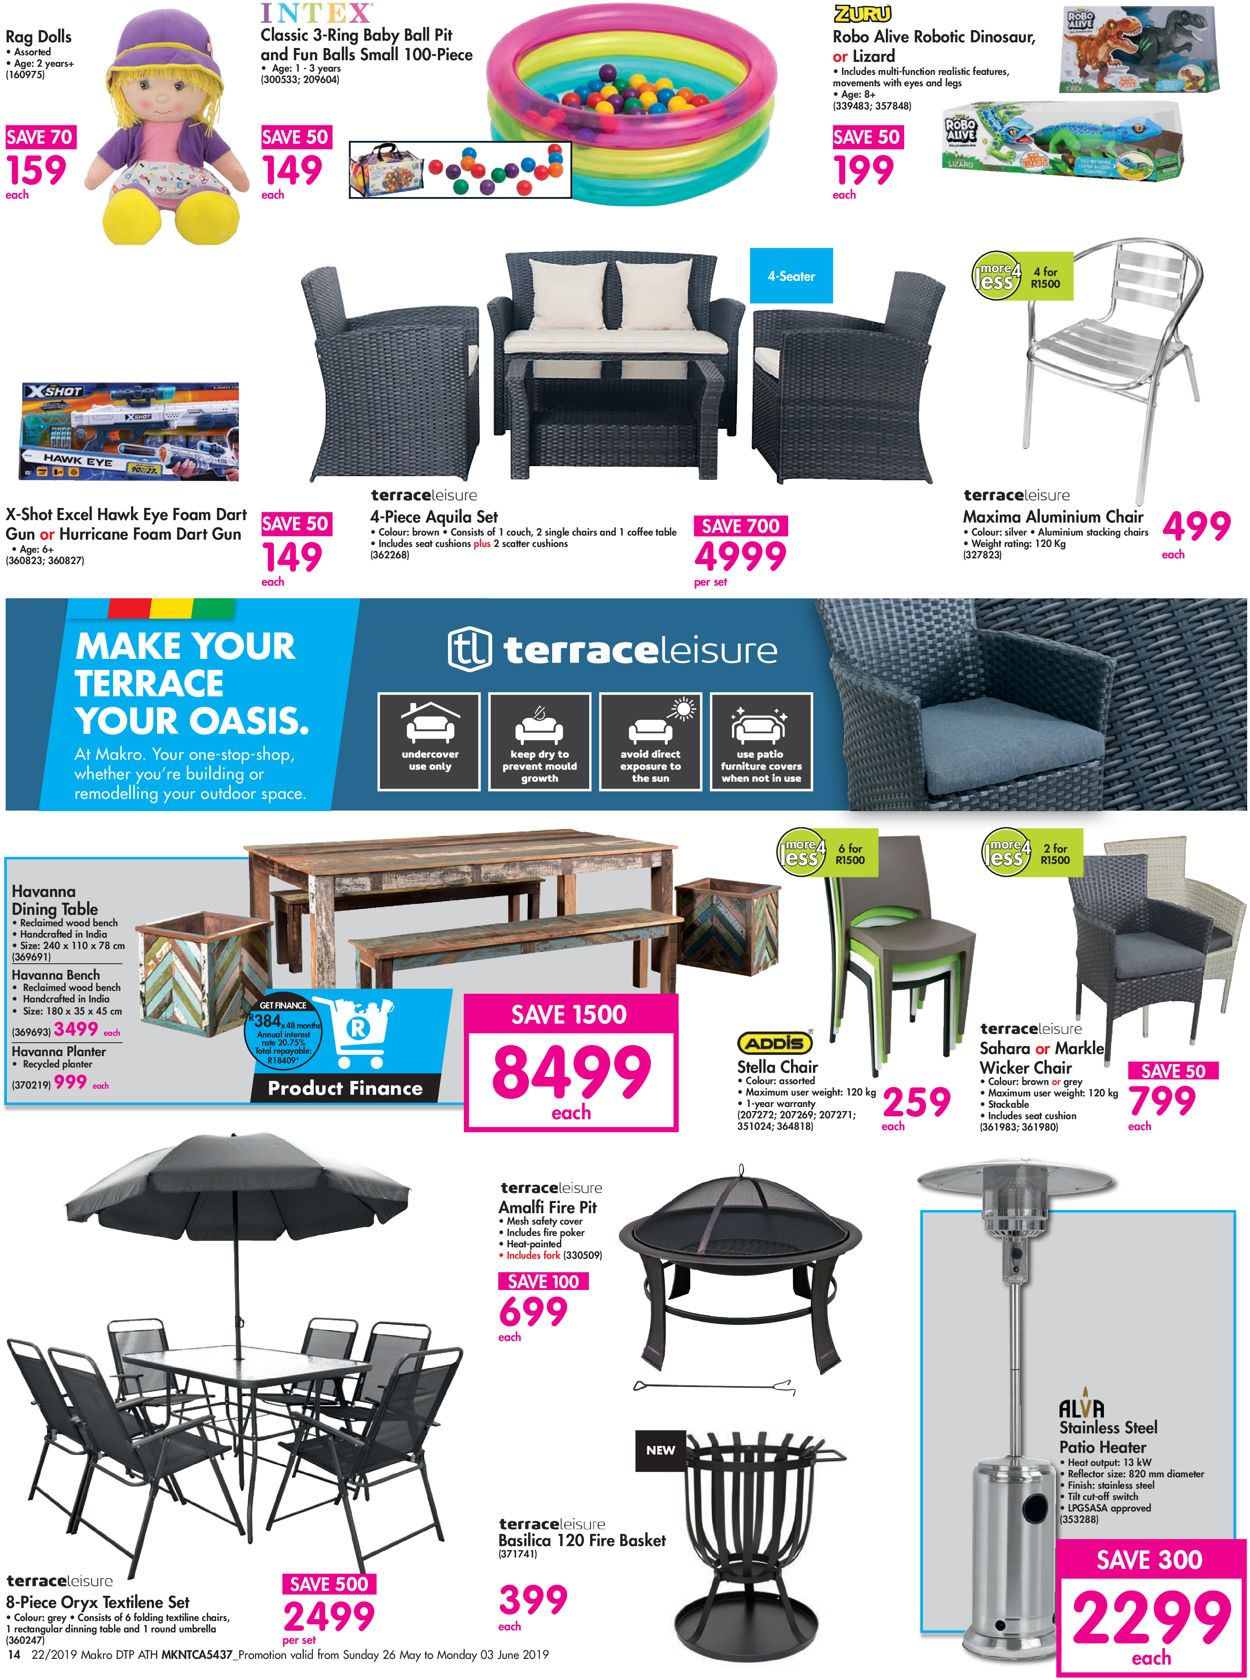 Makro Catalogue from 2019/05/26